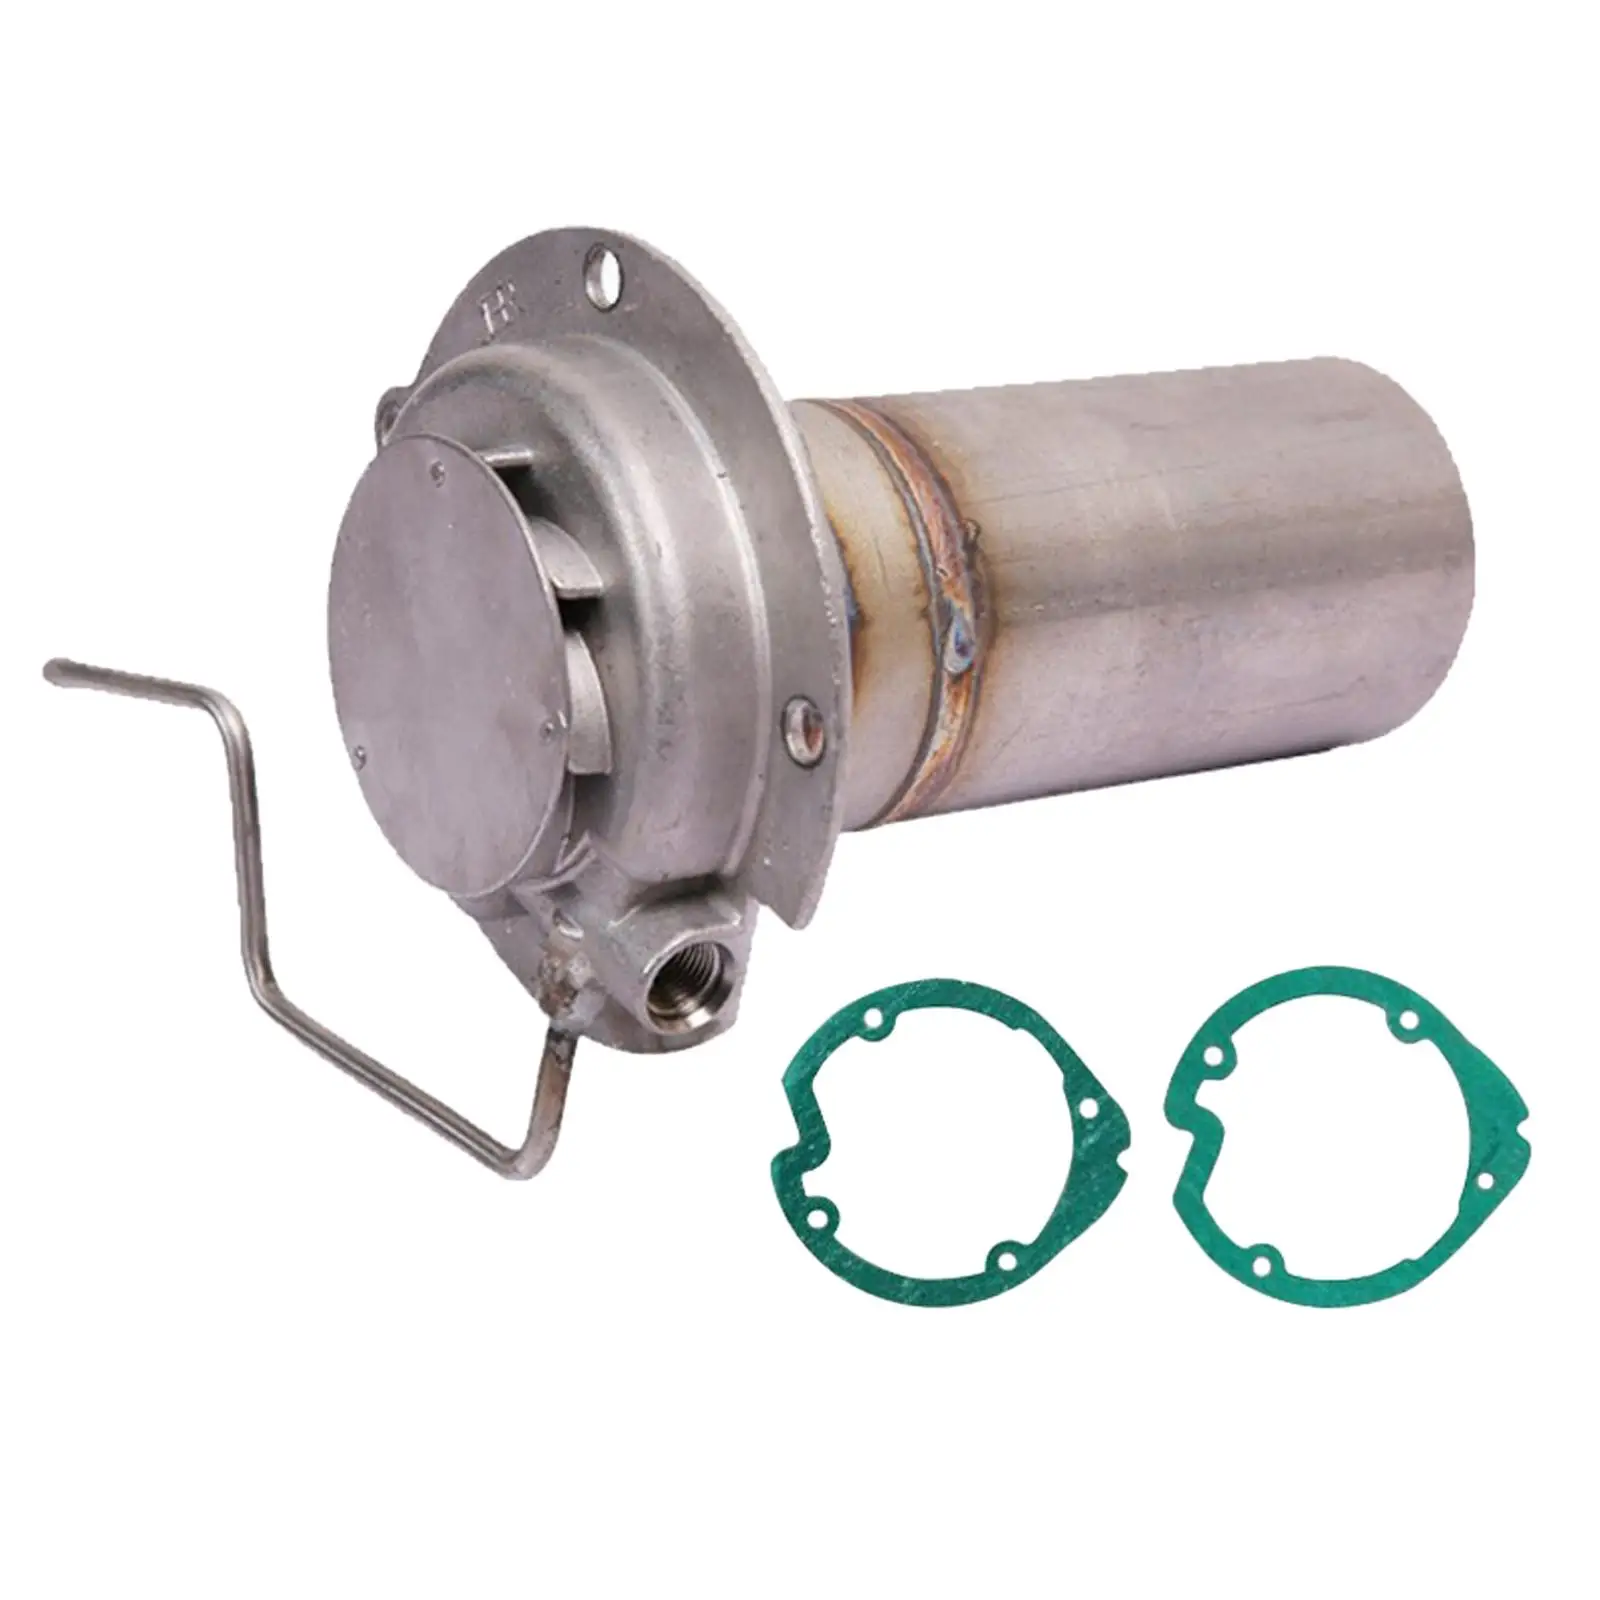 Automotive Combustion Chamber Stainless Steel for Parking Heater Fast